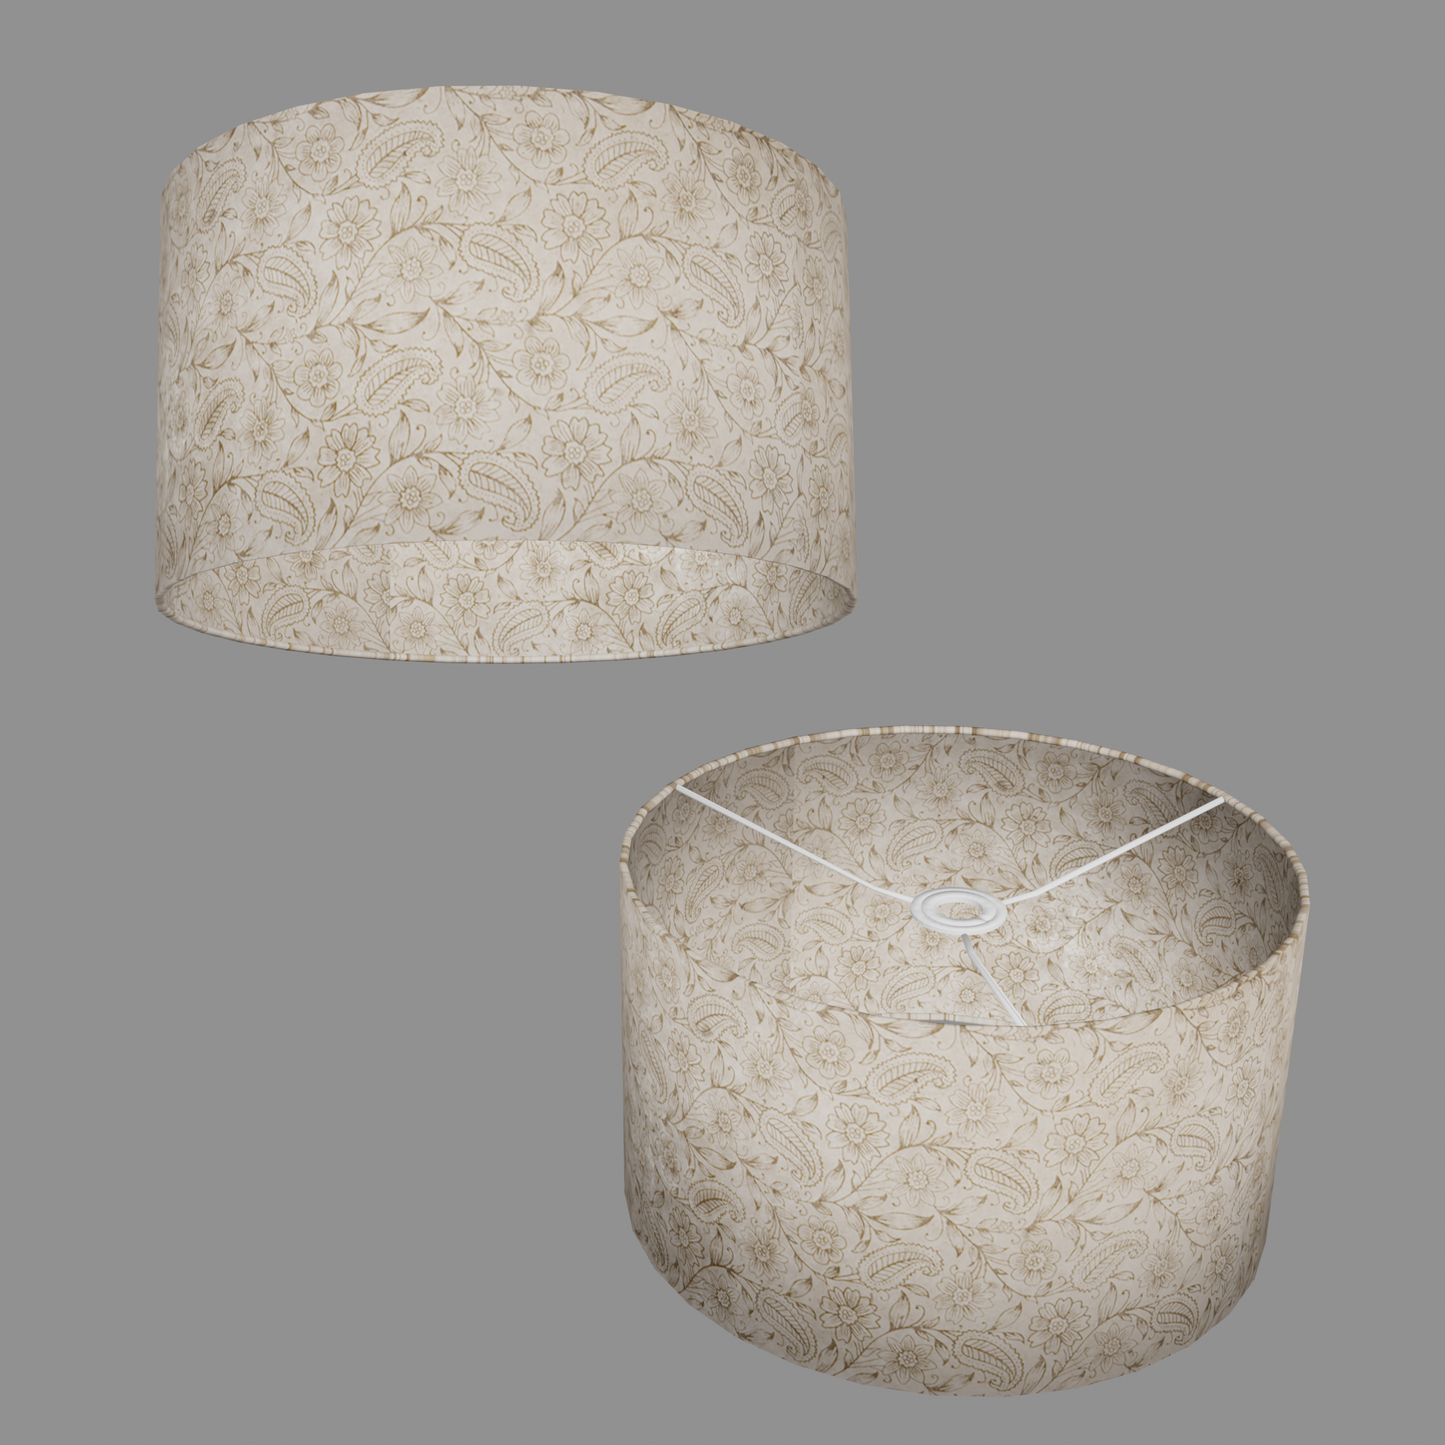 Drum Lamp Shade - P69 - Garden Gold on Natural, 35cm(d) x 20cm(h)